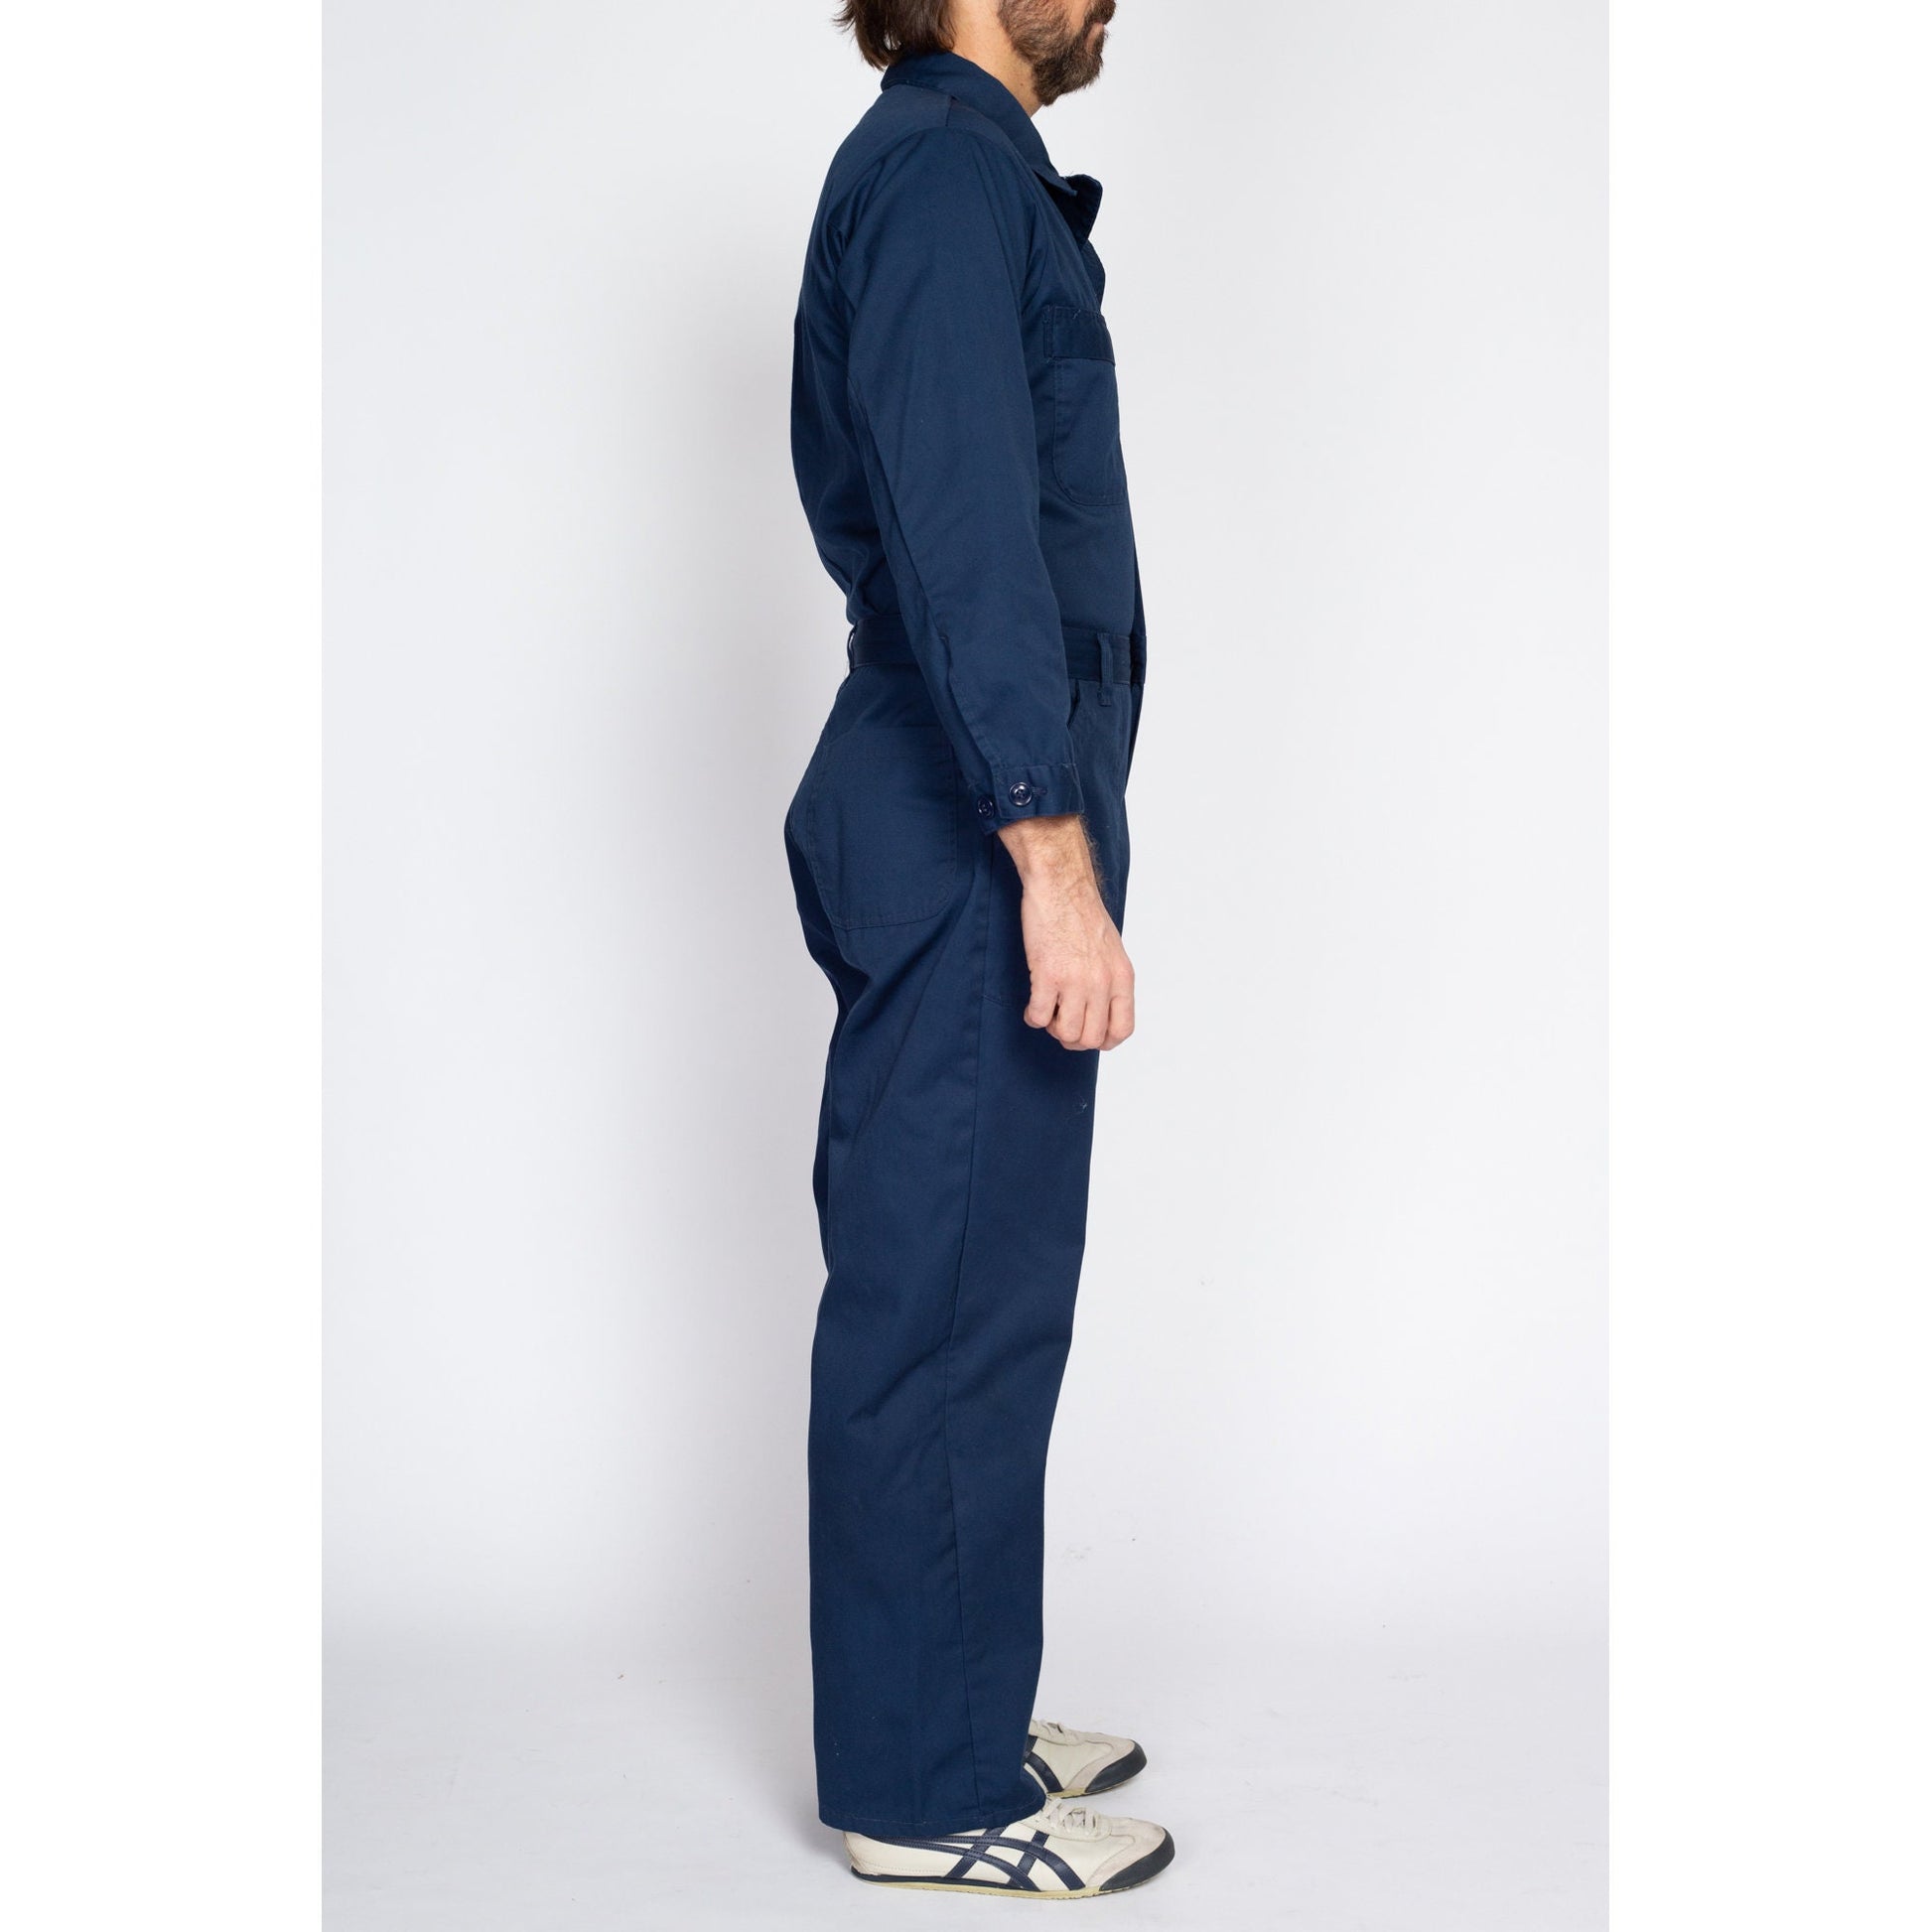 Workwear Coveralls New Mechanic Overalls Jumpsuit Outfit Pants